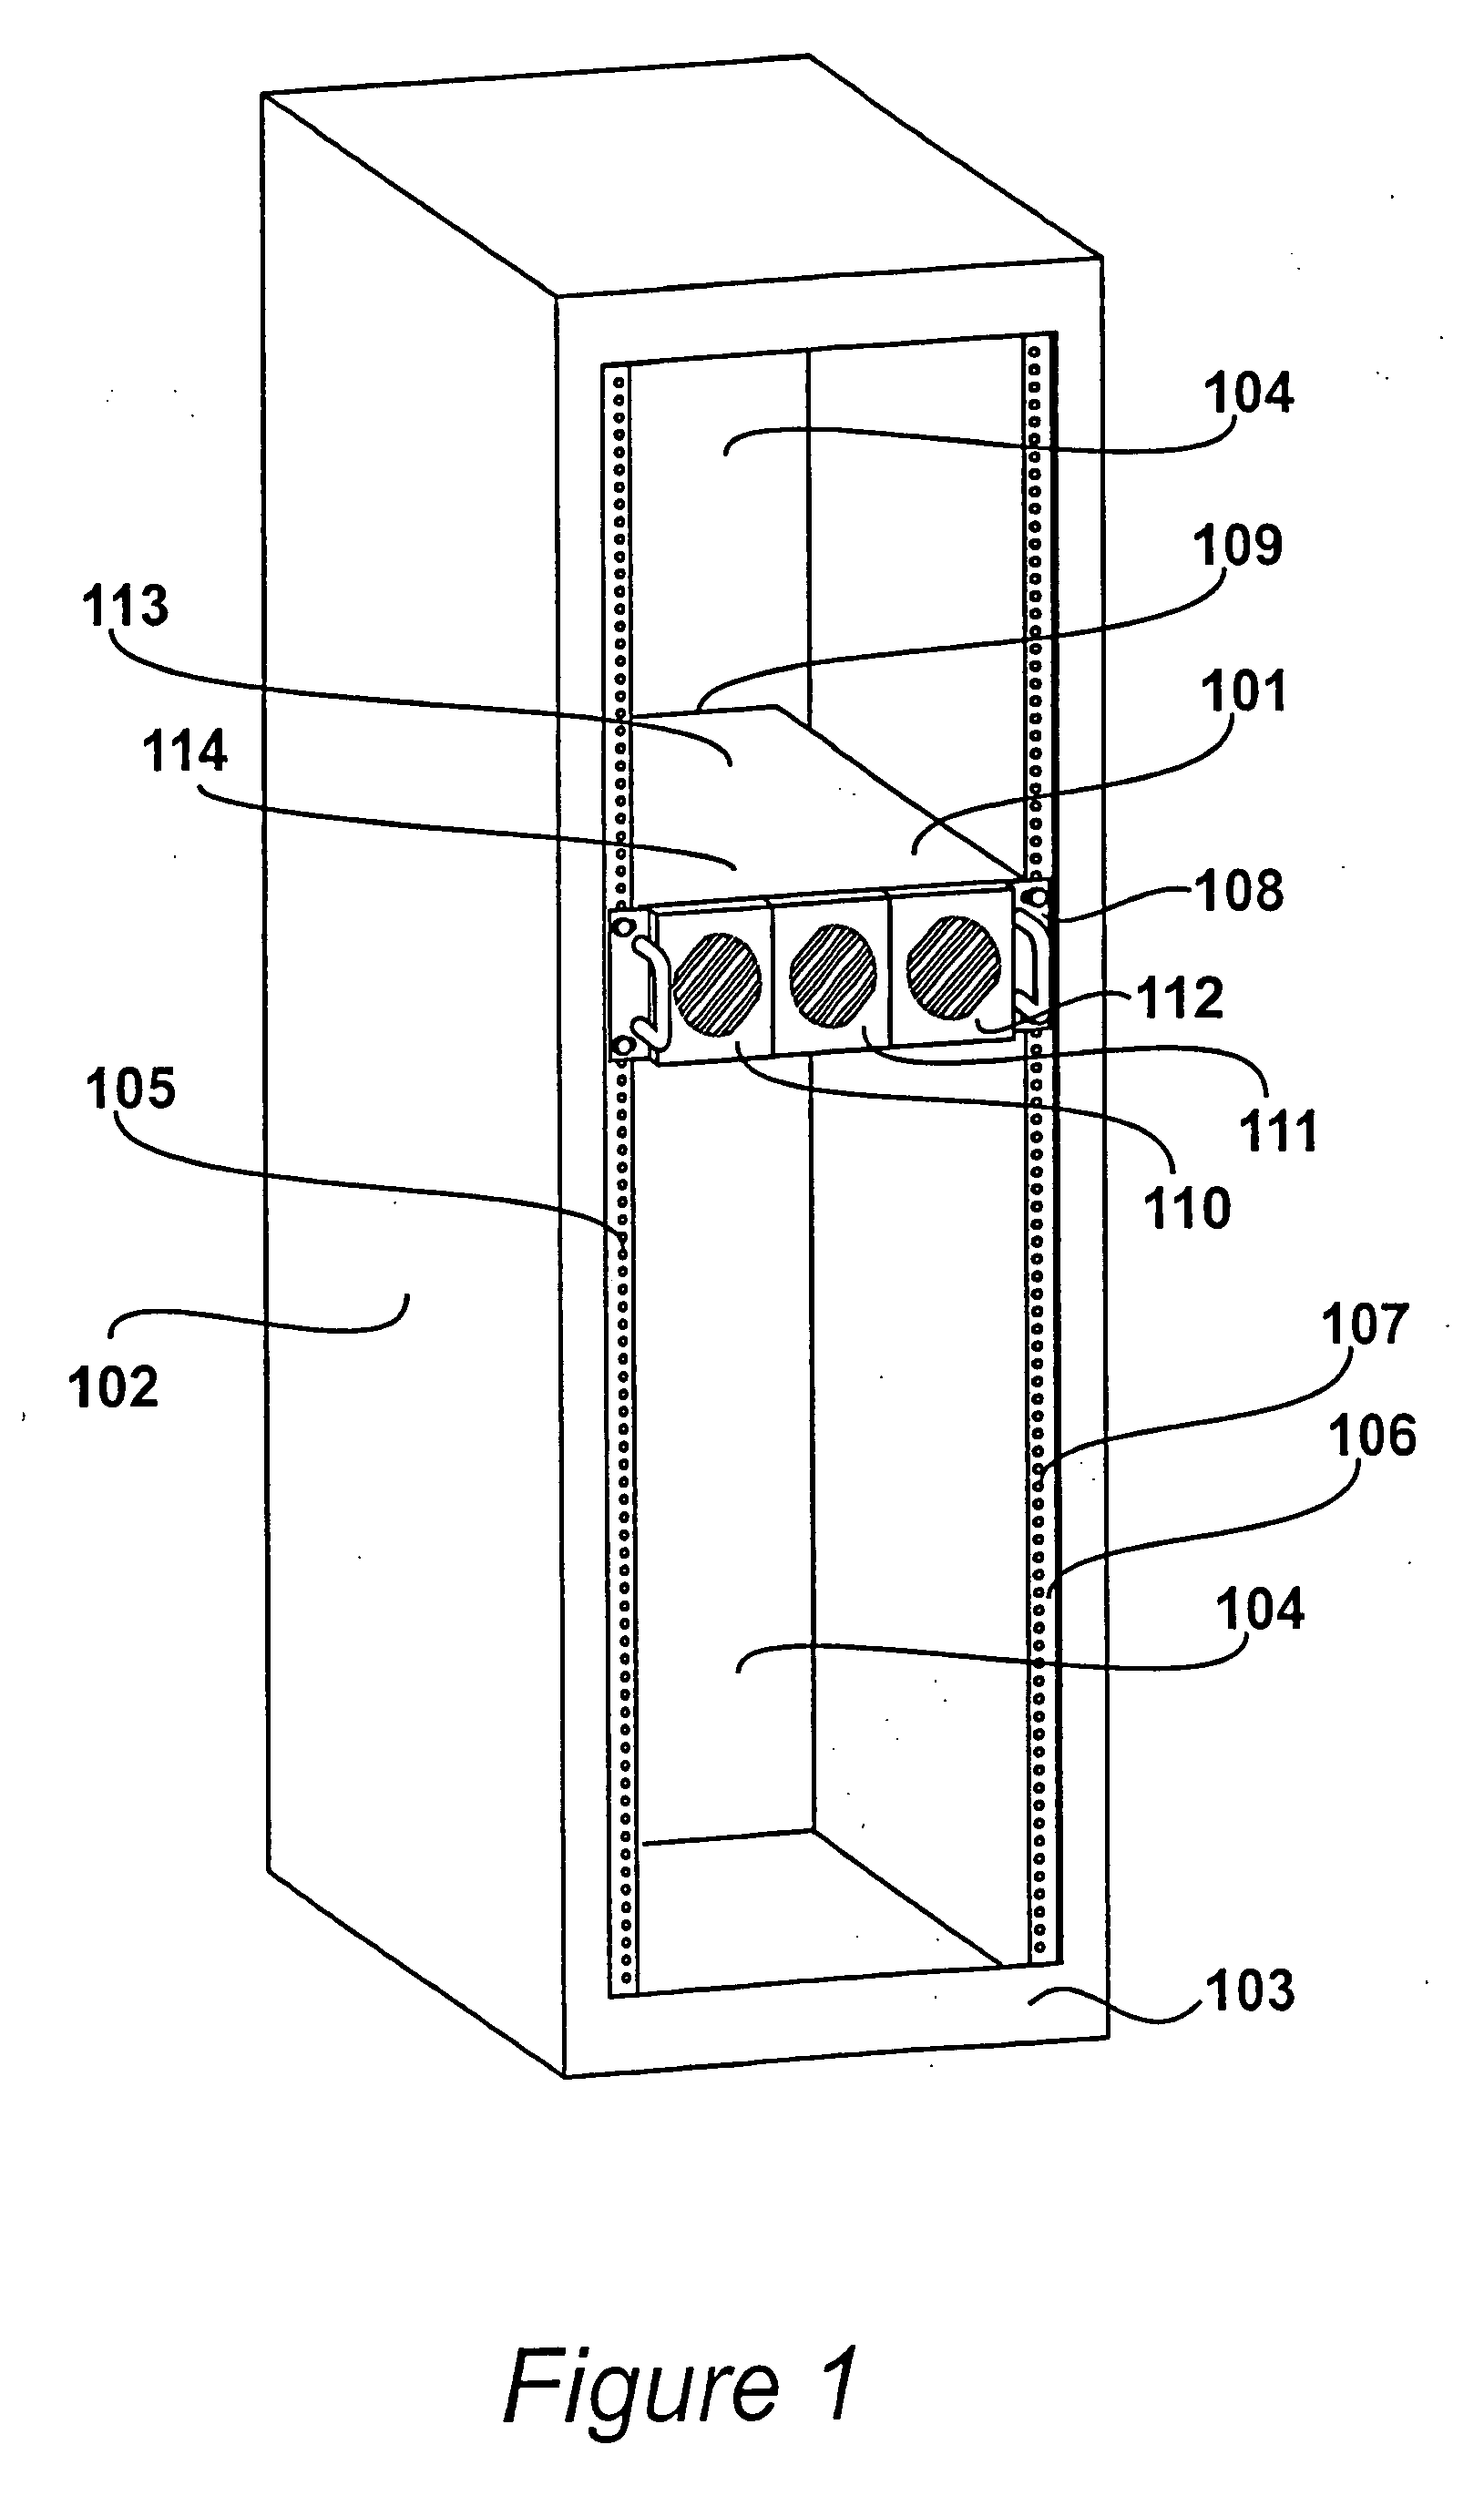 Apparatus for Storing Data